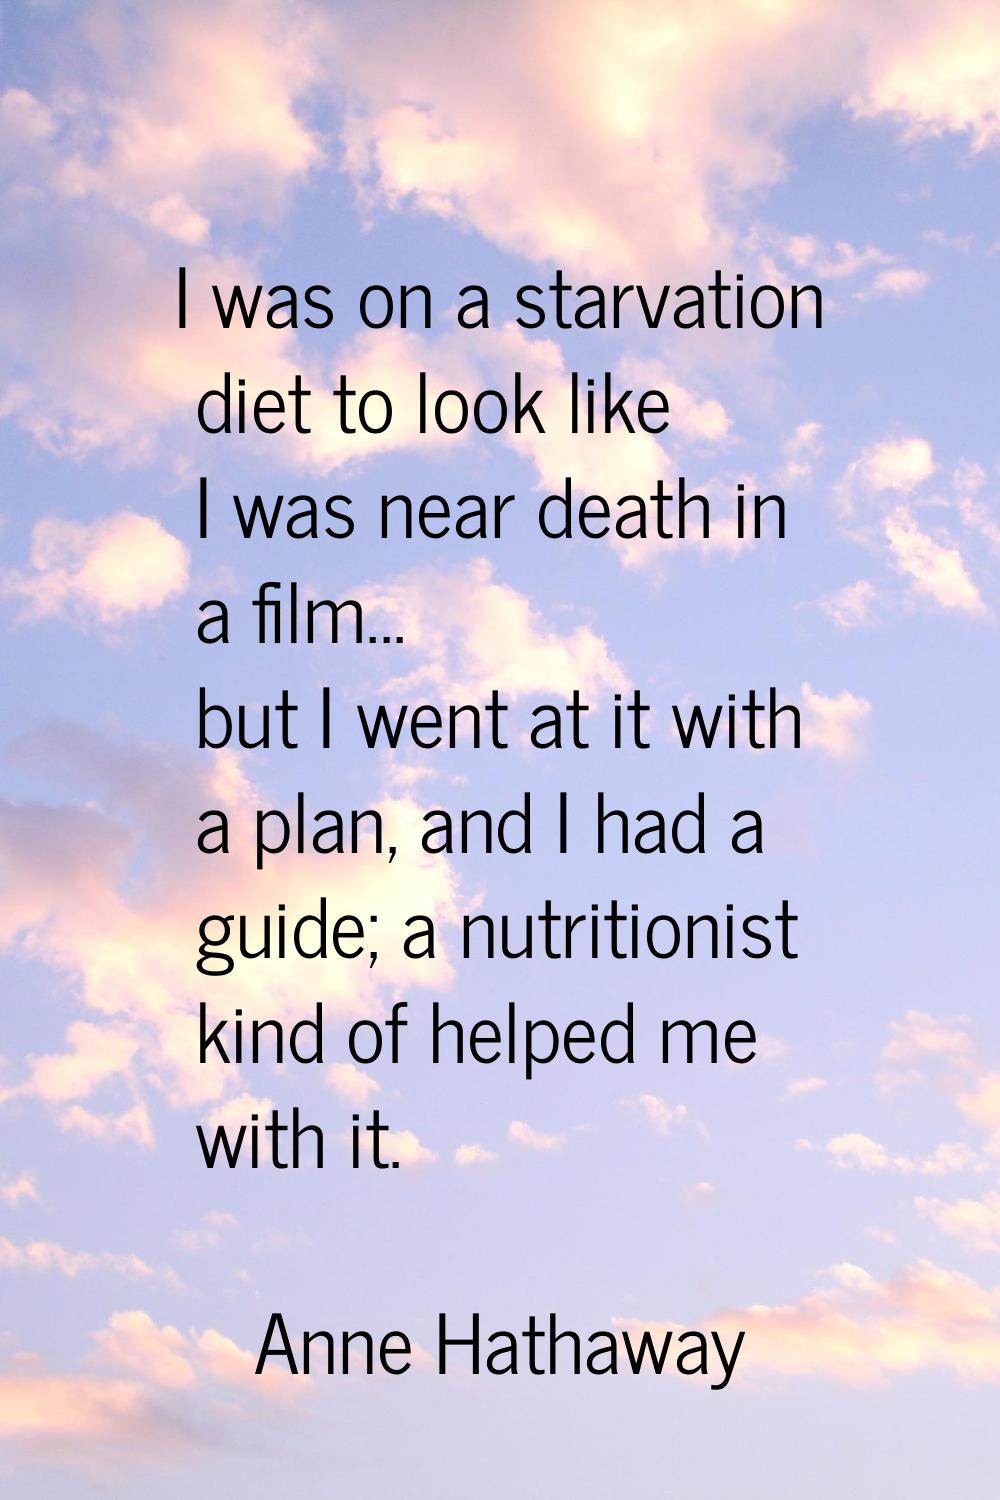 I was on a starvation diet to look like I was near death in a film... but I went at it with a plan,